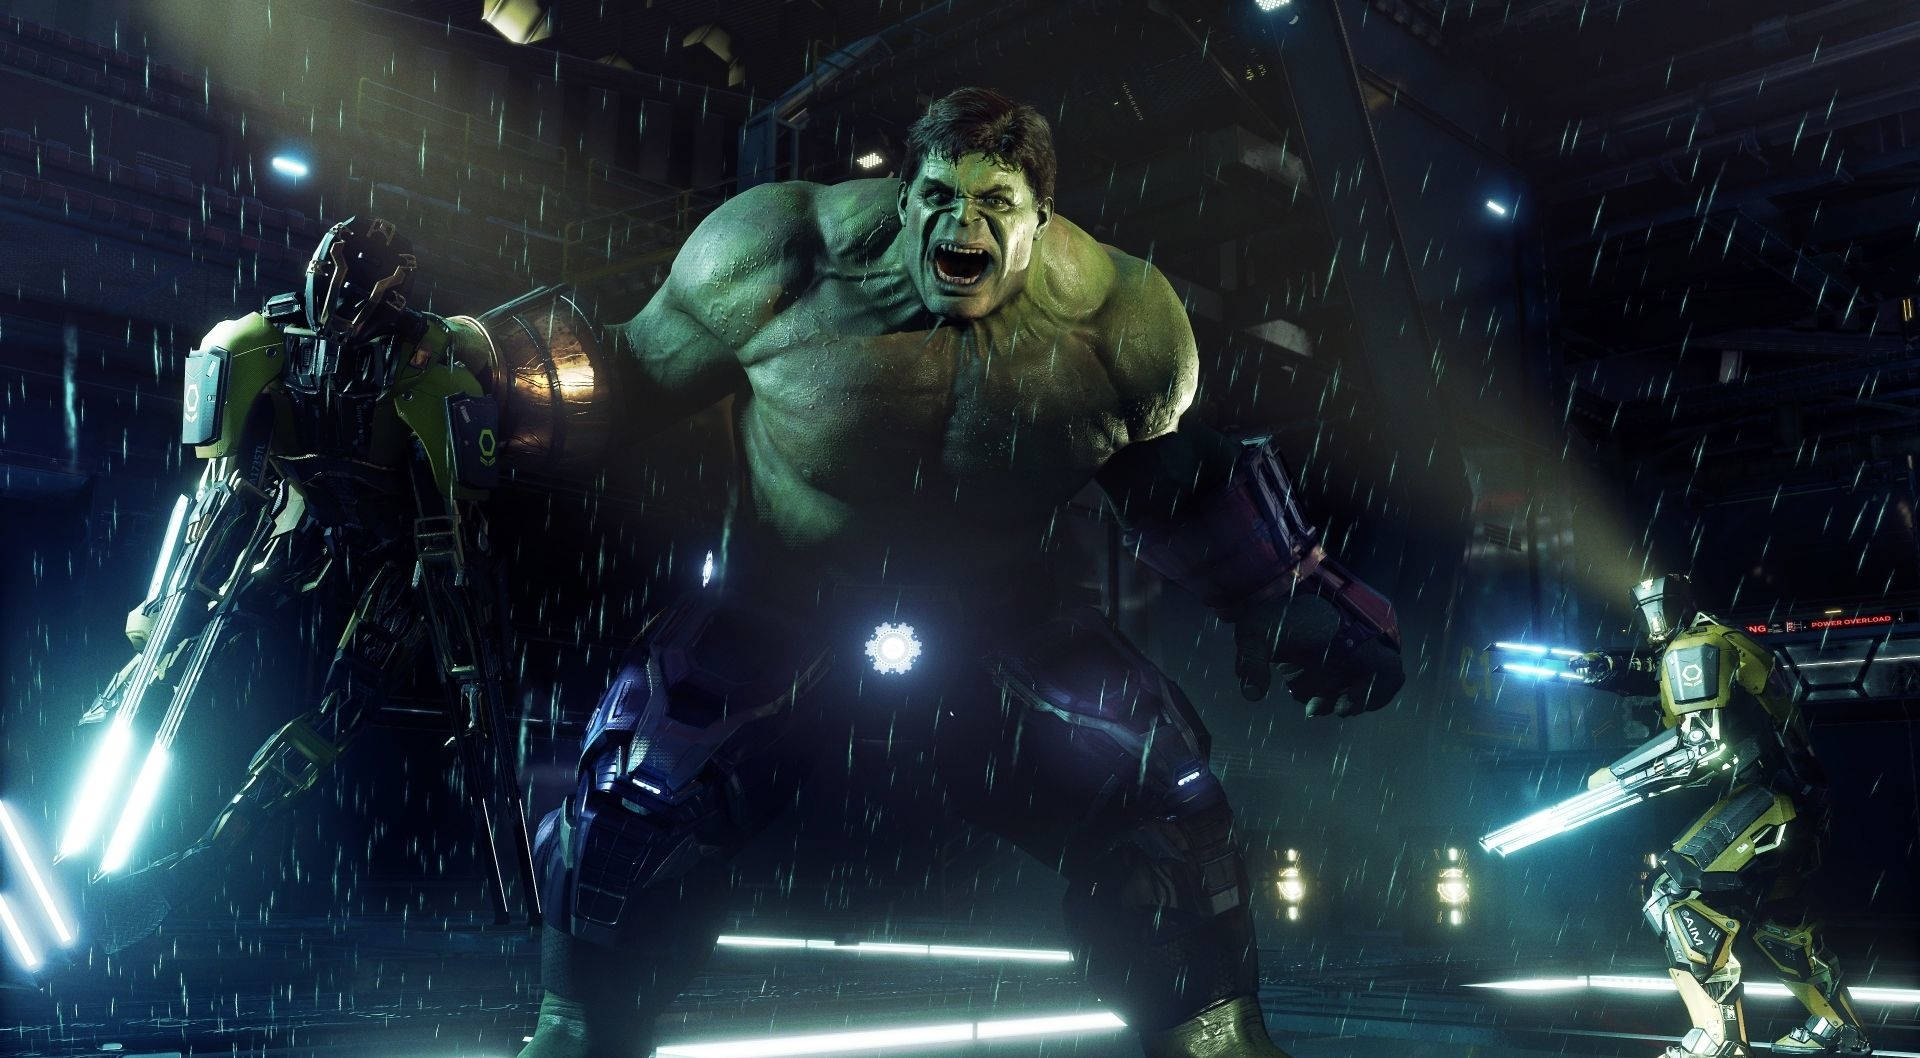 The Hulk Avengers Ps4 Game Background